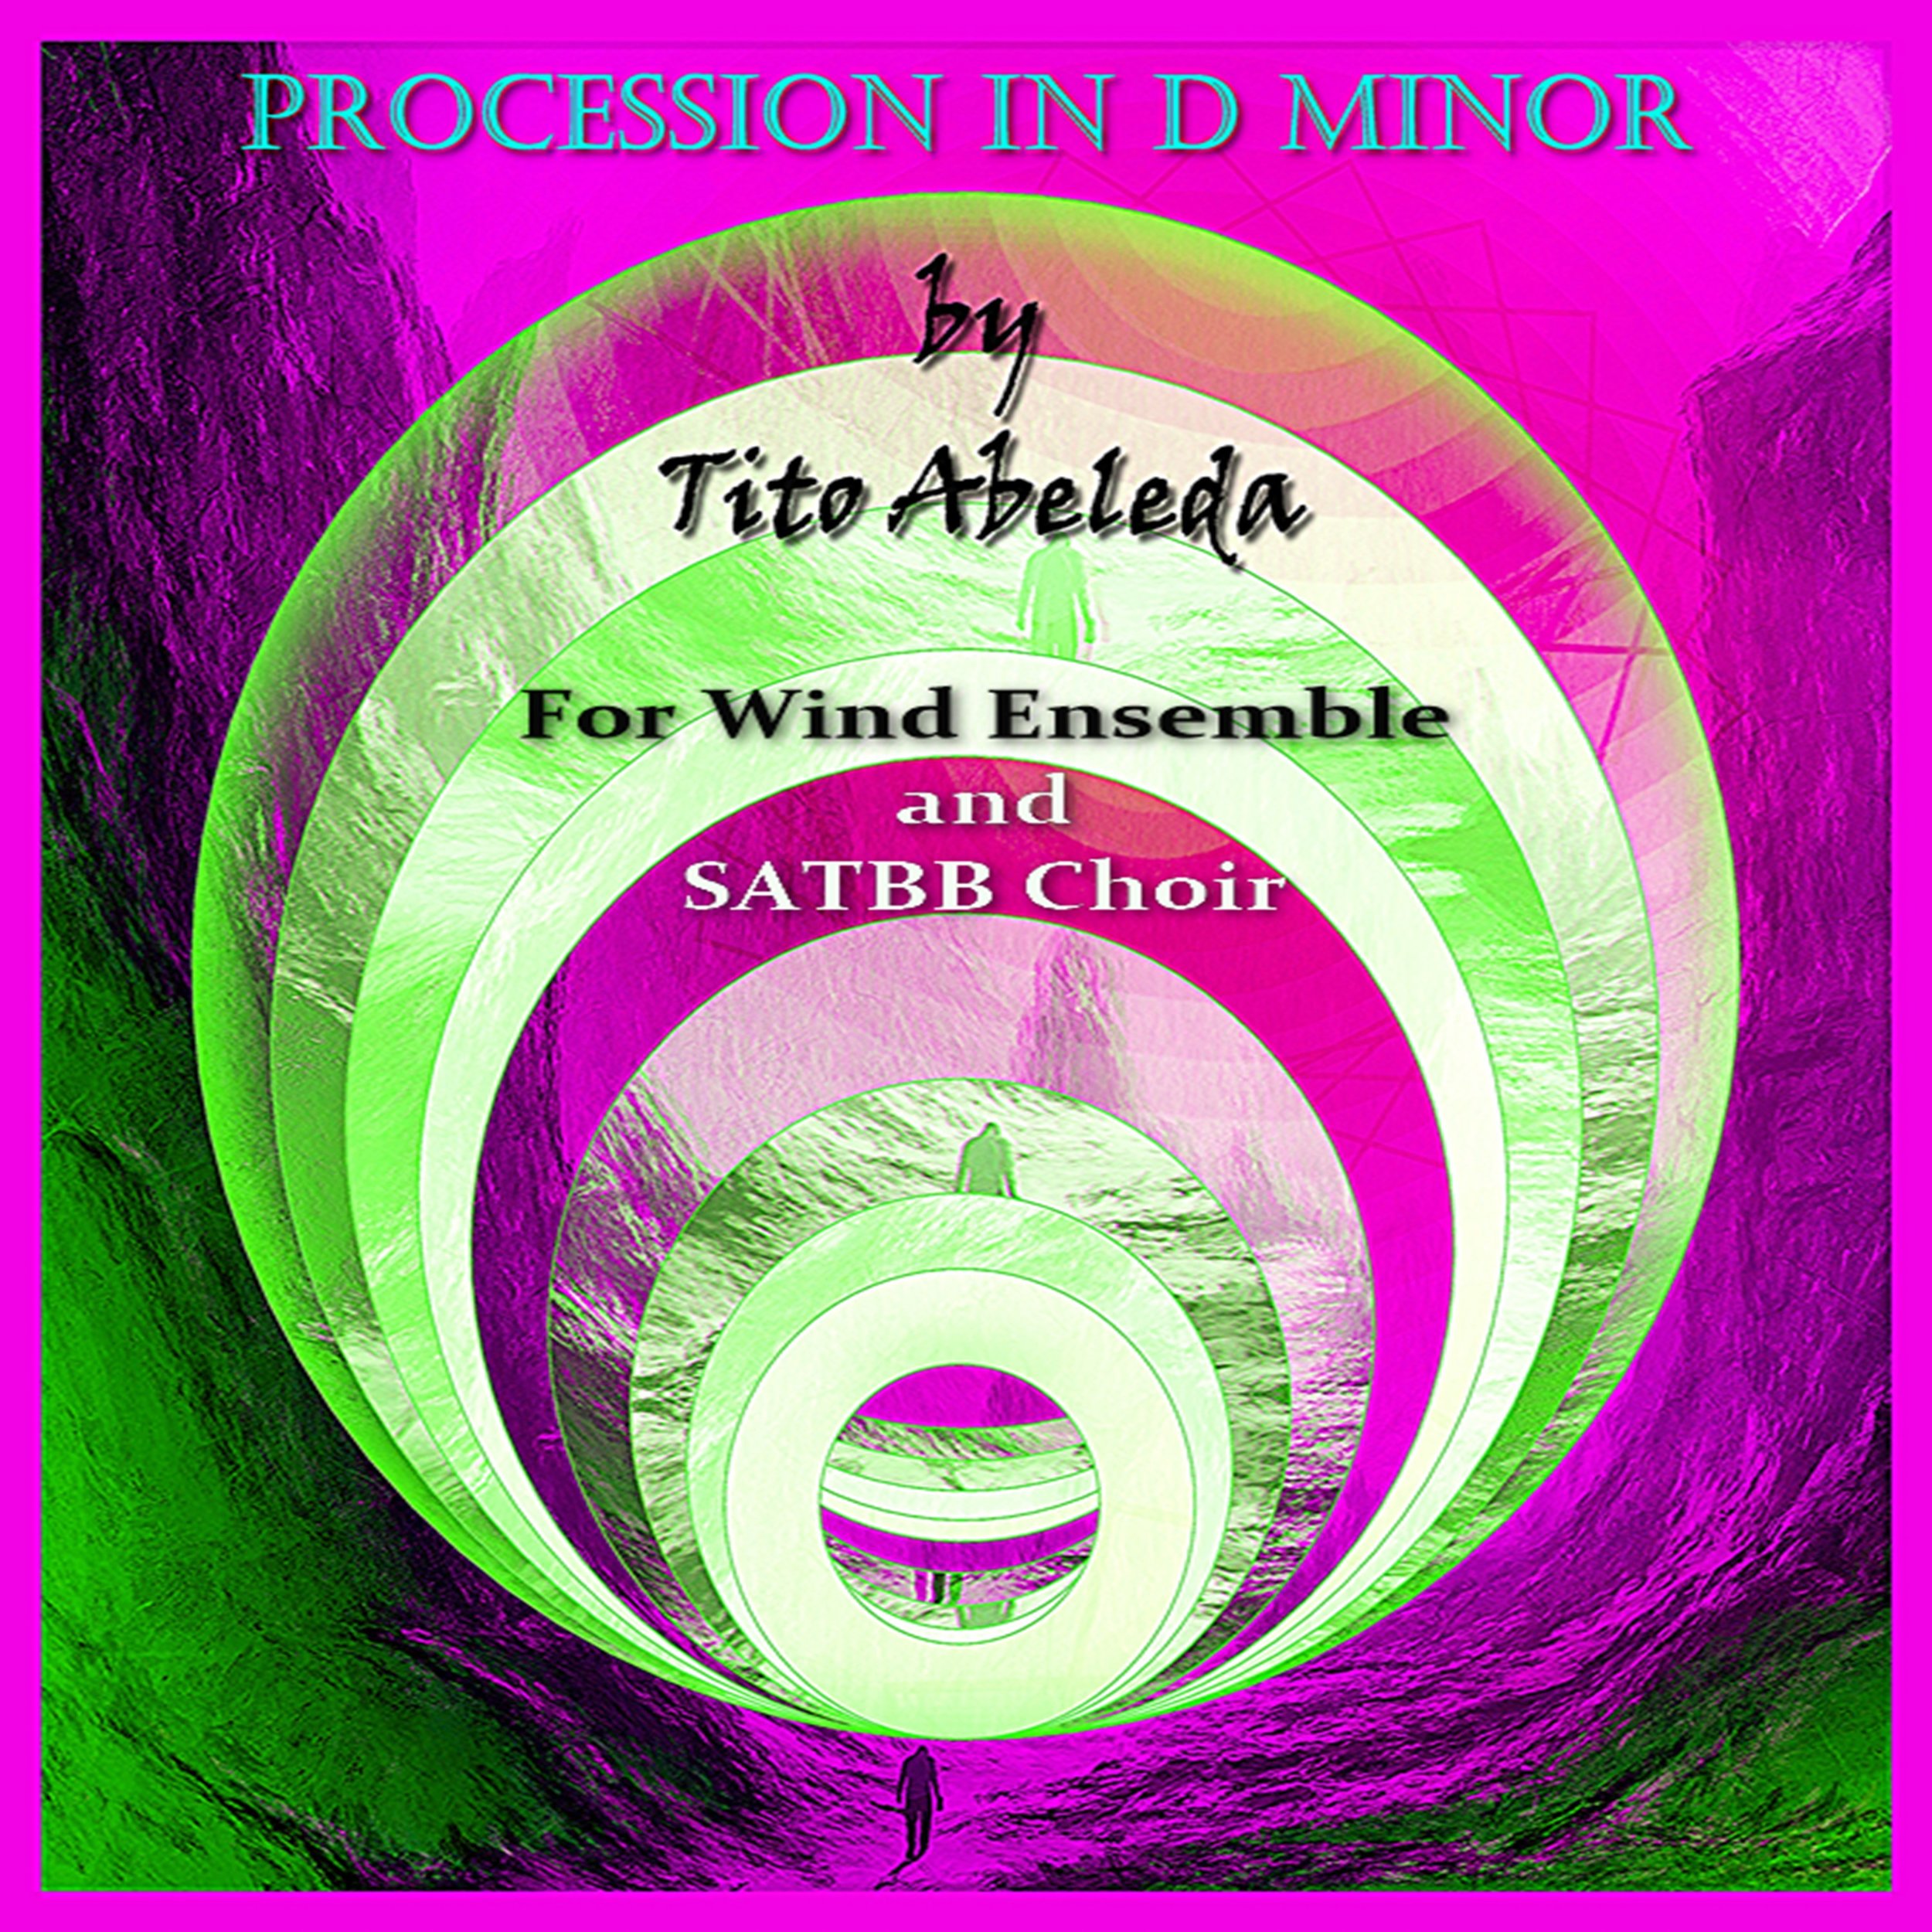 Procession in D Minor (for Wind Ensemble and SATBB Choir)